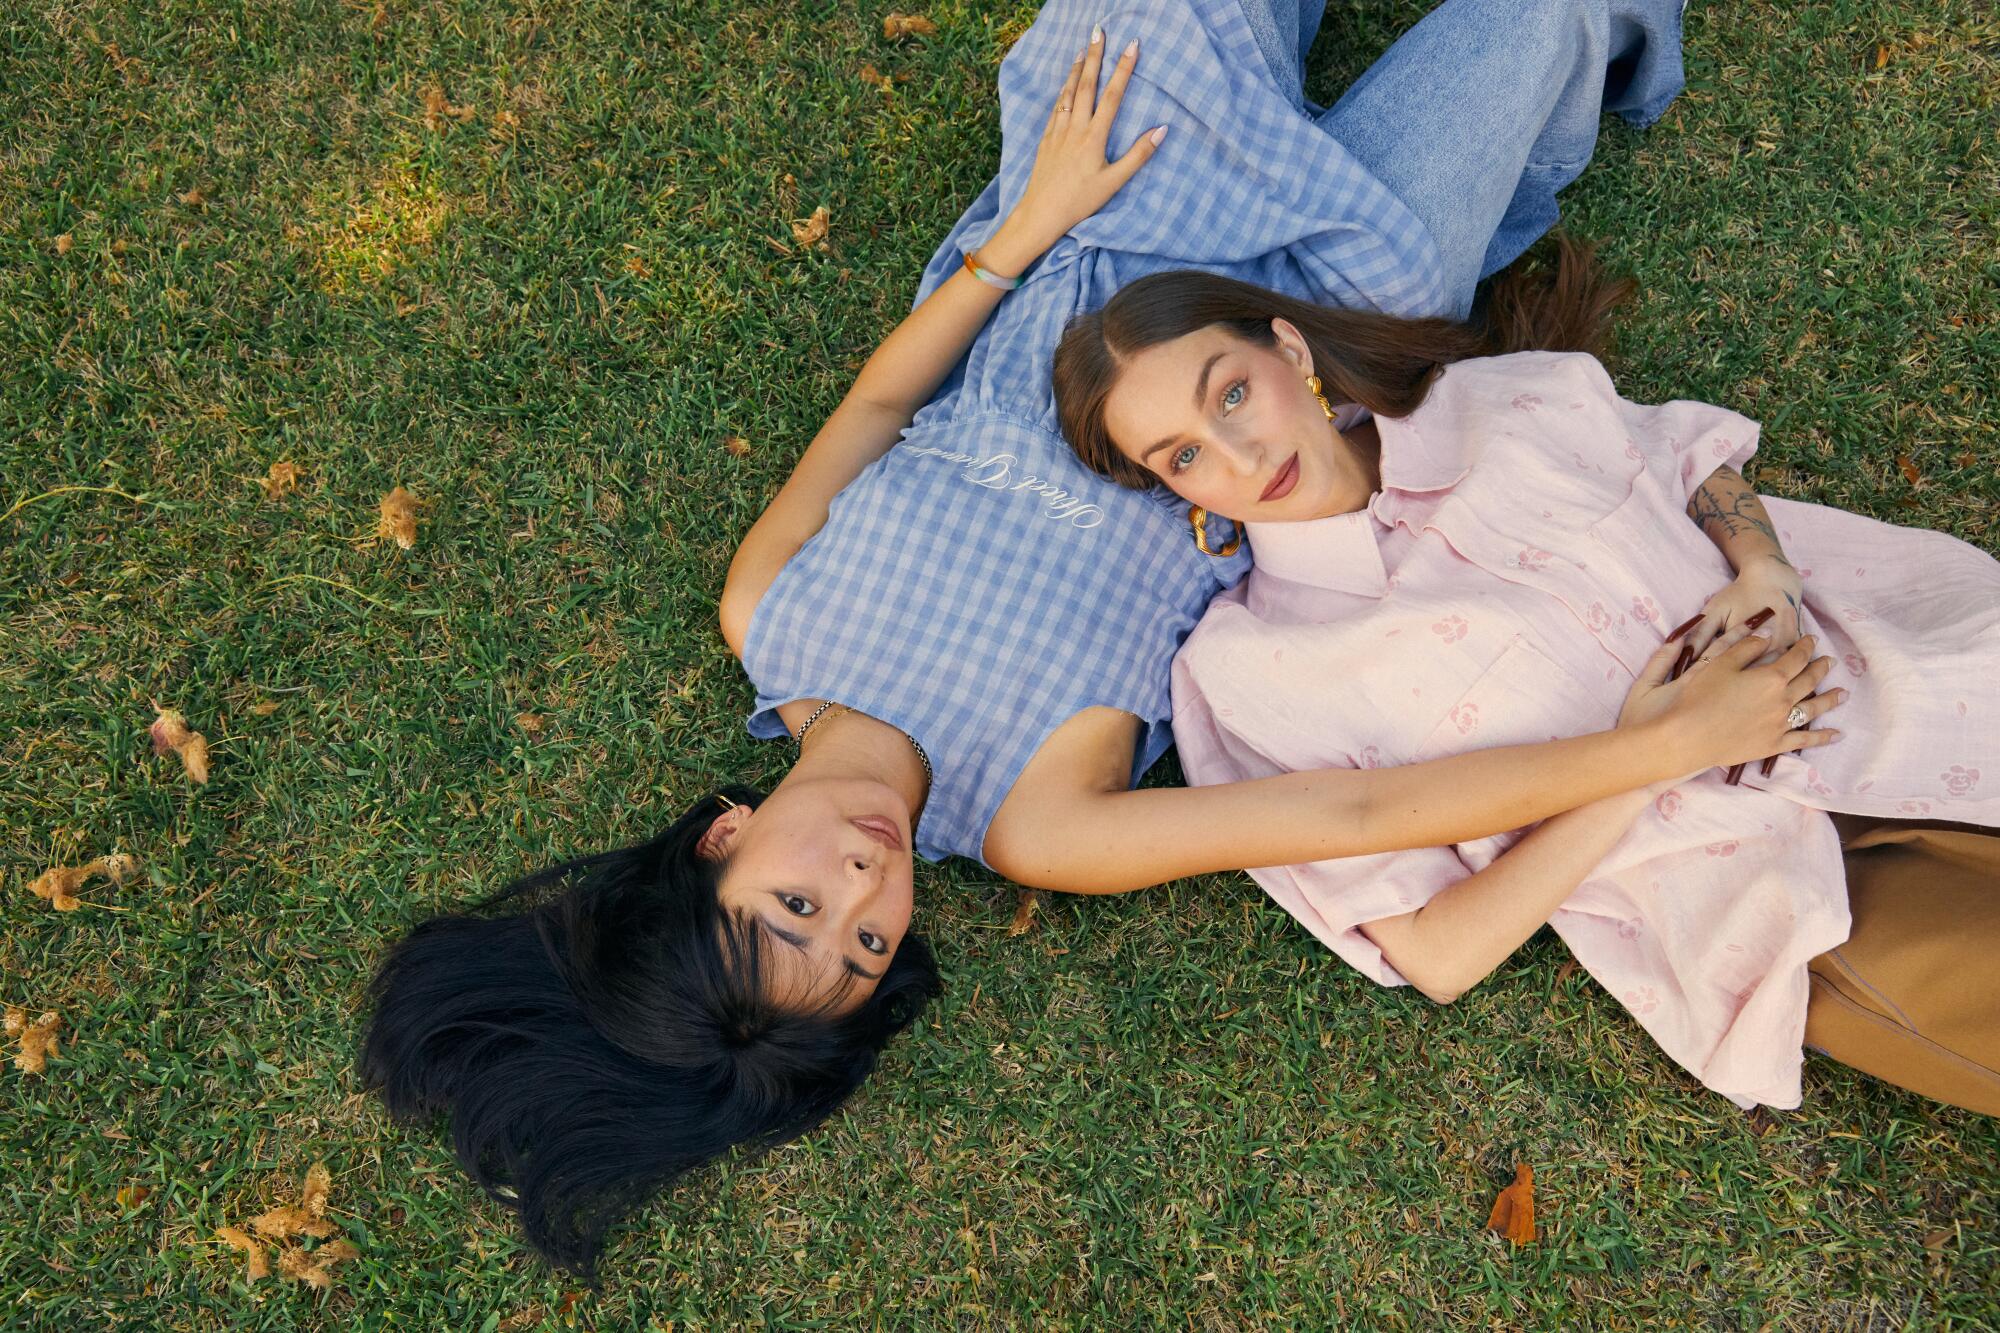 Andrea Cheung and Devin Perry lay in the grass wearing clothing from their brand, Street Grandma.